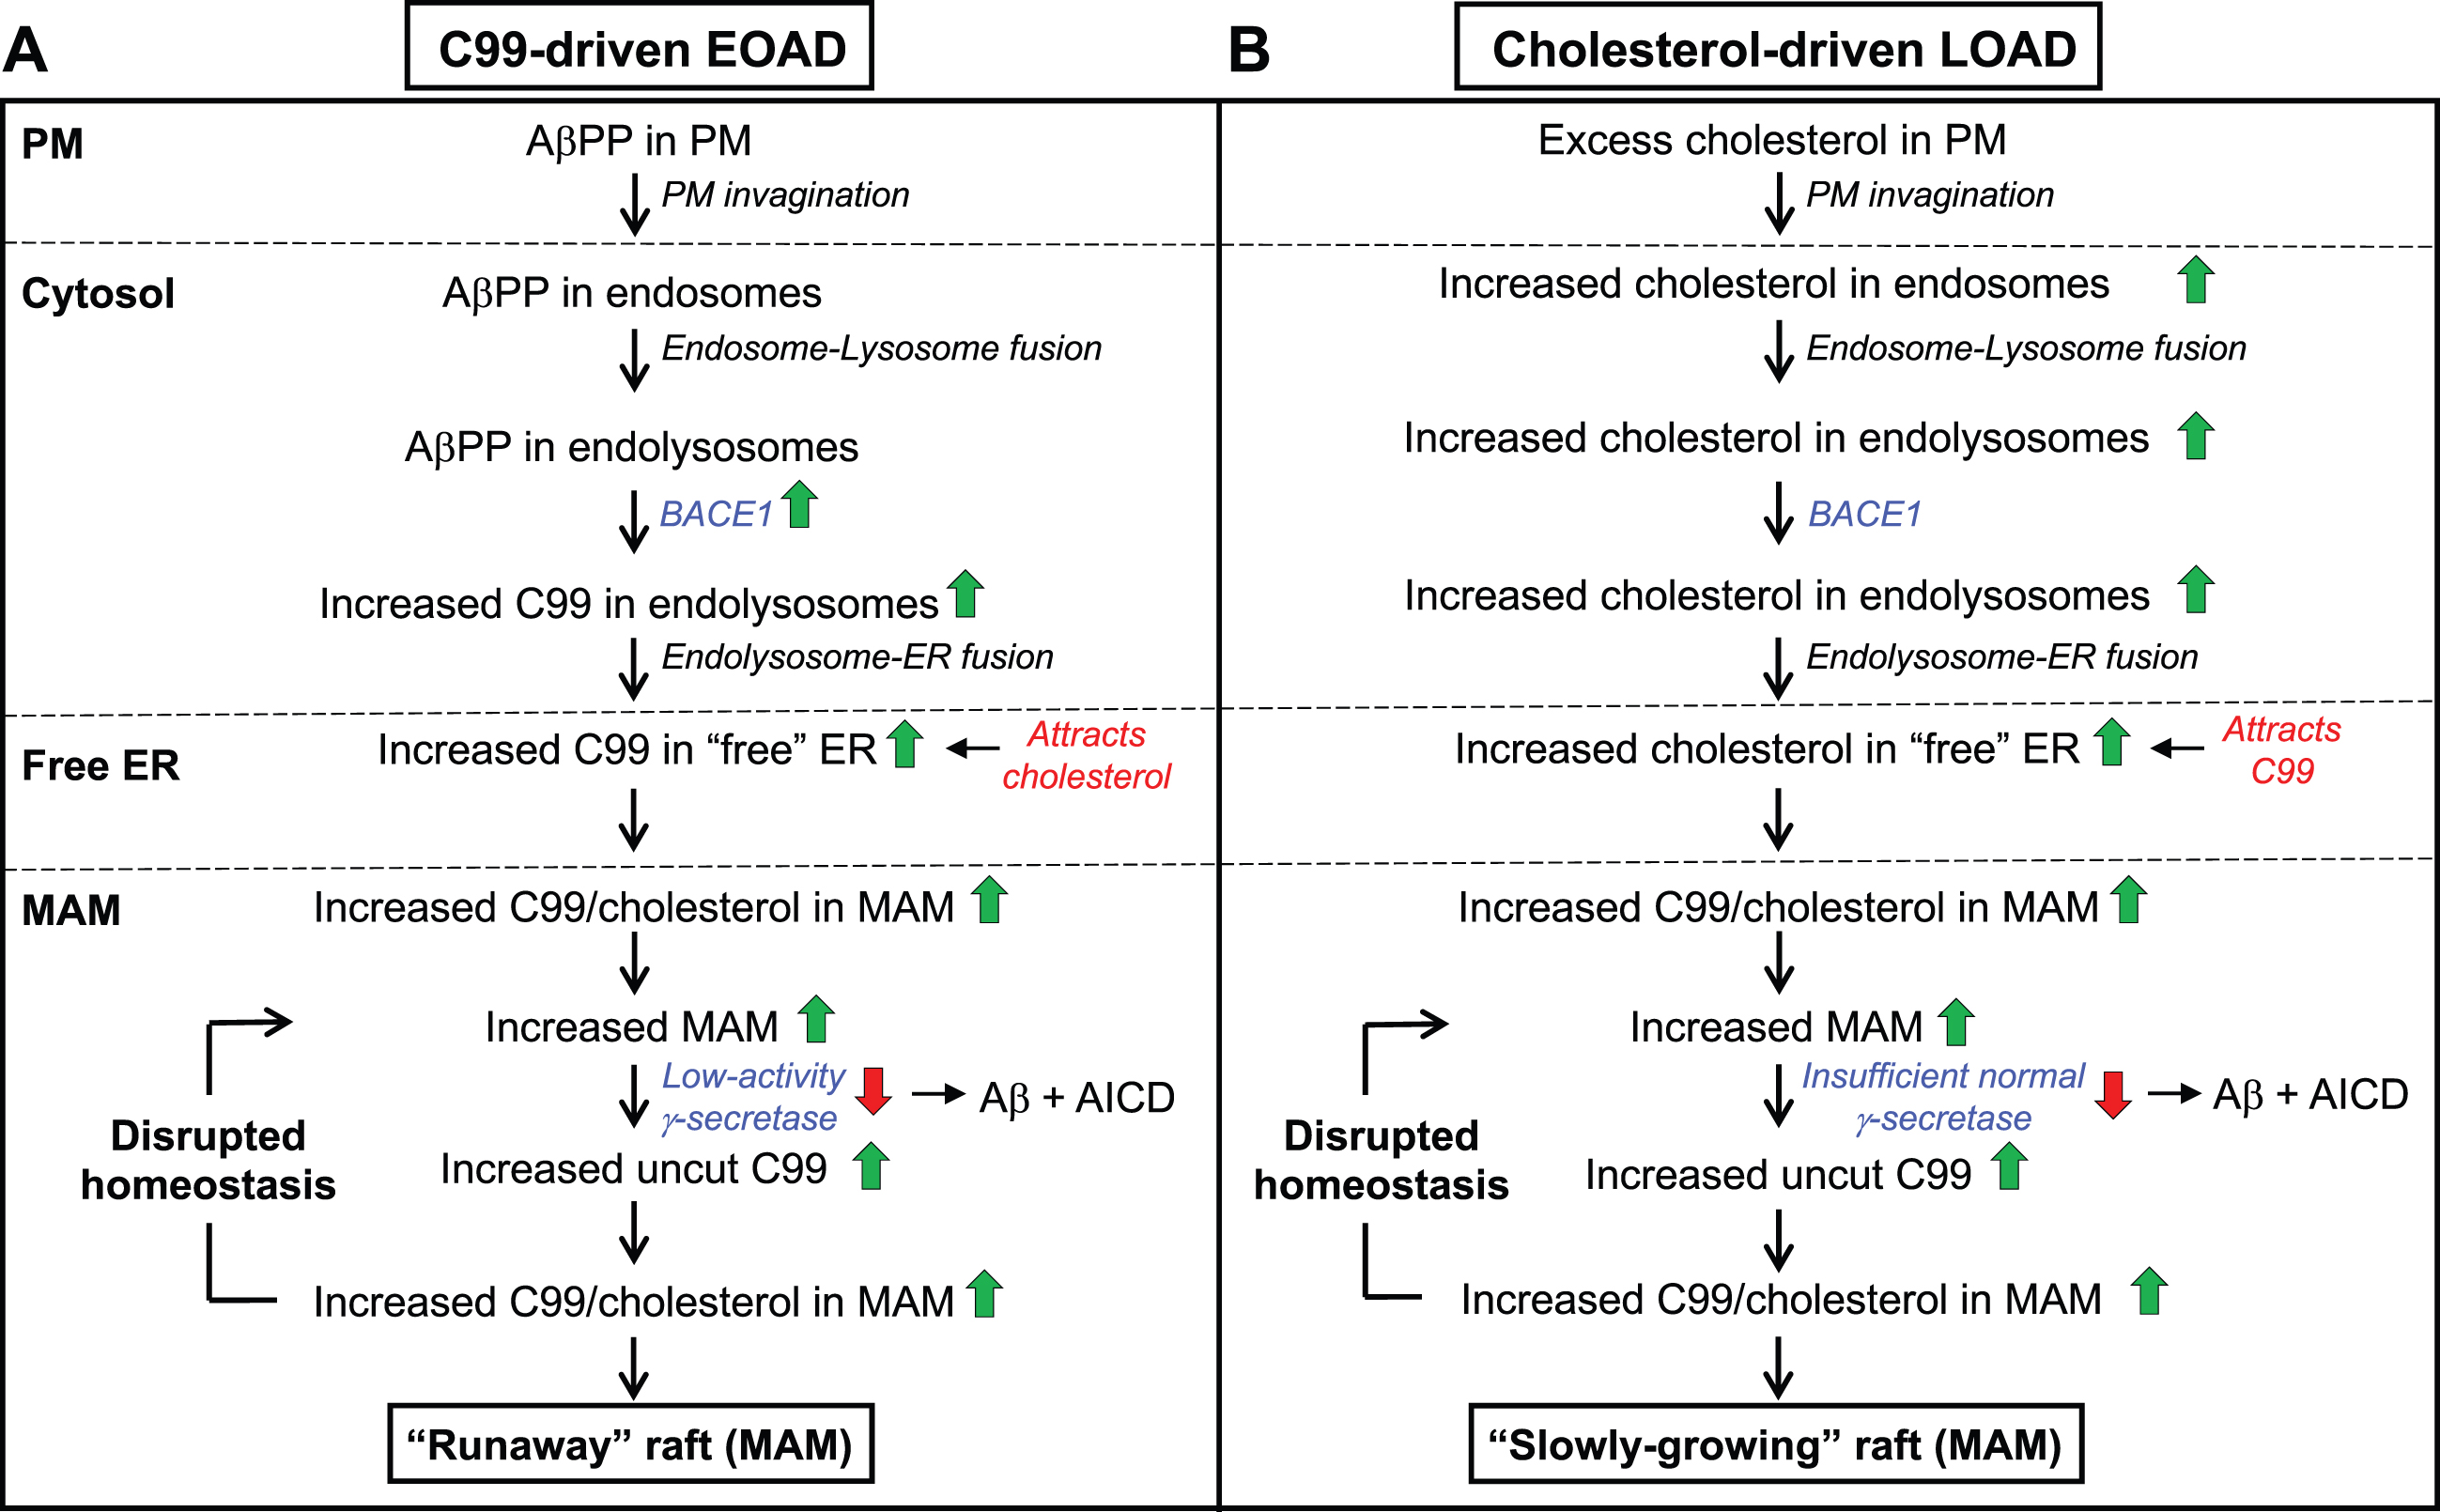 The C99-cholesterol axis in AD. In AD, cholesterol and AβPP enter the cell as in the normal situation (see Fig. 3). However, (A) in C99-driven early-onset AD (EOAD) - both FAD and those forms of SAD associated with underlying C99-related risk factors (see Table 1) - impaired γ-secretase activity is insufficient to cleave all of the MAM-localized C99, leaving “excess” uncut C99 to accumulate in the MAM raft above the “setpoint” level. The elevated uncut C99 attracts more cholesterol (and sphingomyelin), enlarging the raft that, in turn, attracts even more C99 that, too, is cleaved sub-optimally. In this way, MAM homeostasis is disrupted in a vicious cycle in which the raft grows inexorably and relatively rapidly (a “runaway” raft). B) In cholesterol-driven late-onset AD (LOAD) associated with underlying cholesterol-related risk factors (see Table 1), the raft also grows, but for a different reason: the accumulation of excess intracellular cholesterol binds to C99 and causes the raft to grow. Although γ-secretase is functioning relatively normally and efficiently, it is present in an amount insufficient to cleave all the C99 present in the MAM. The excess uncut C99 attracts more cholesterol, enlarging the raft while also generating yet more uncut C99, resulting in the same type of vicious cycle seen in EOAD, albeit in a more slowly-growing raft. Green/red arrows, increased/decreased levels. See text for details.